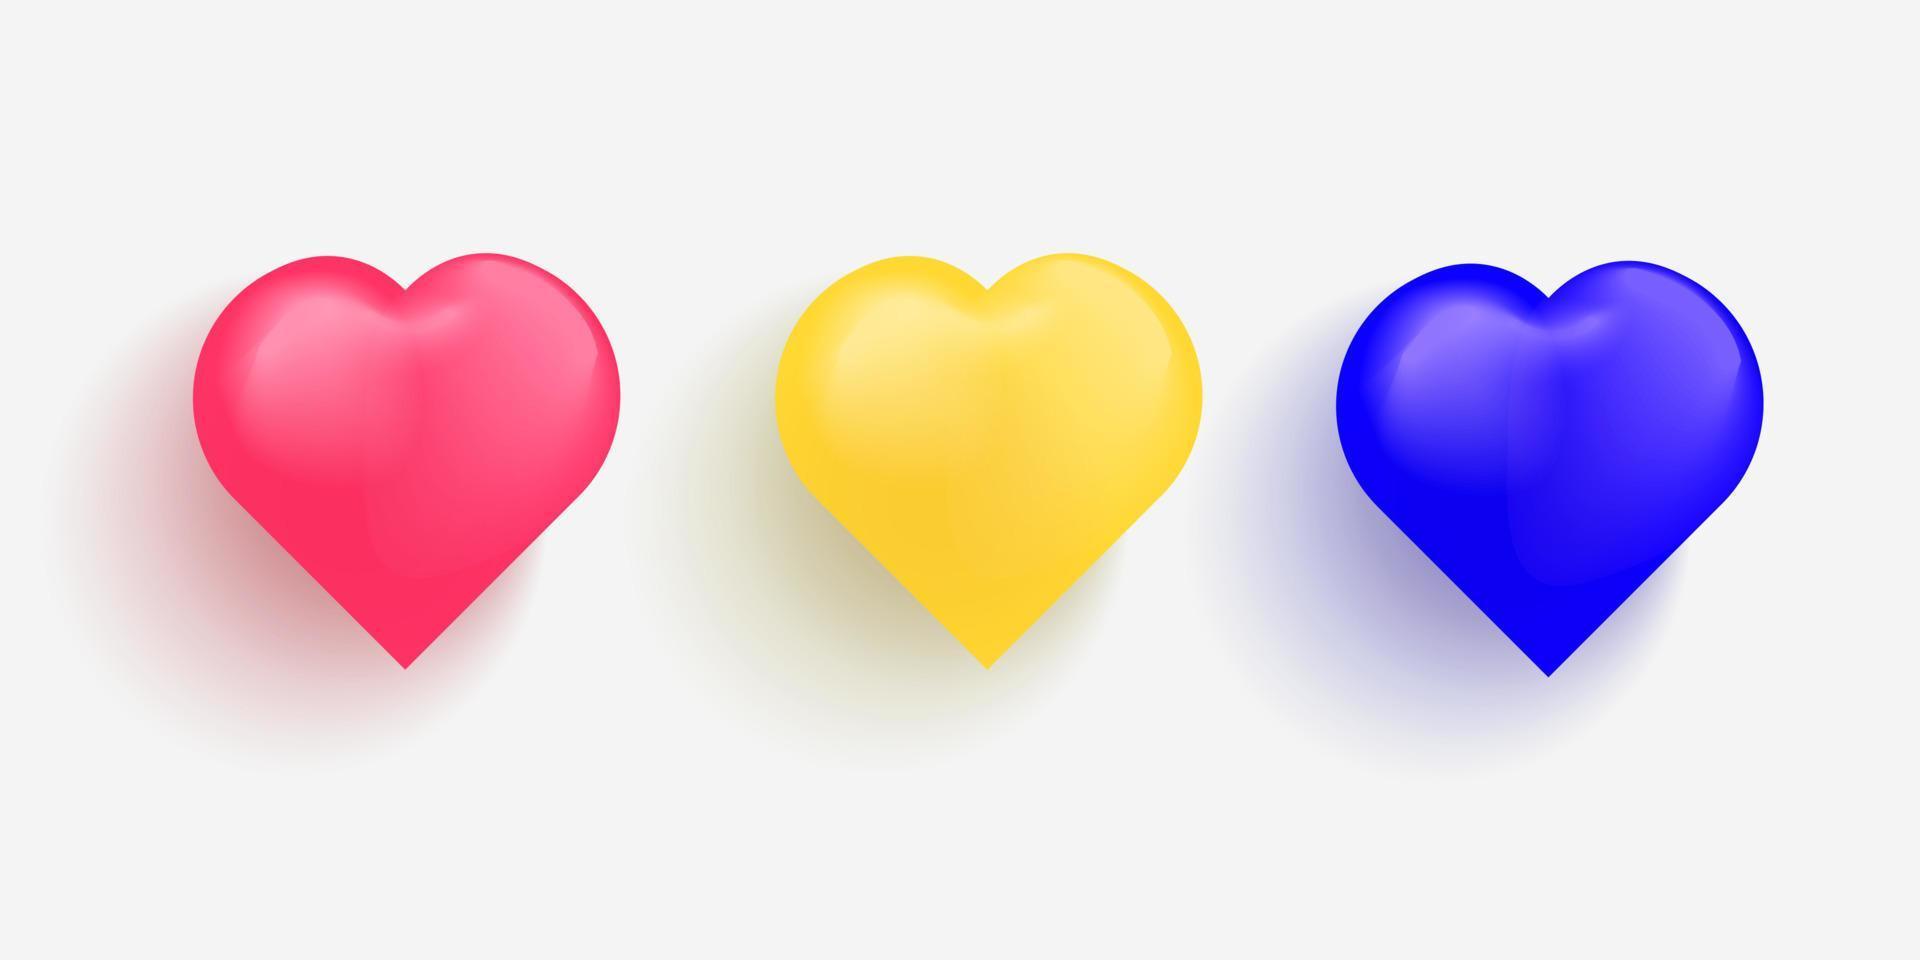 3D Shiny Hearts, Colorful Heart or Love, Suitable for Happy Women's, Mother's, Valentine's Day, birthday greeting card design vector